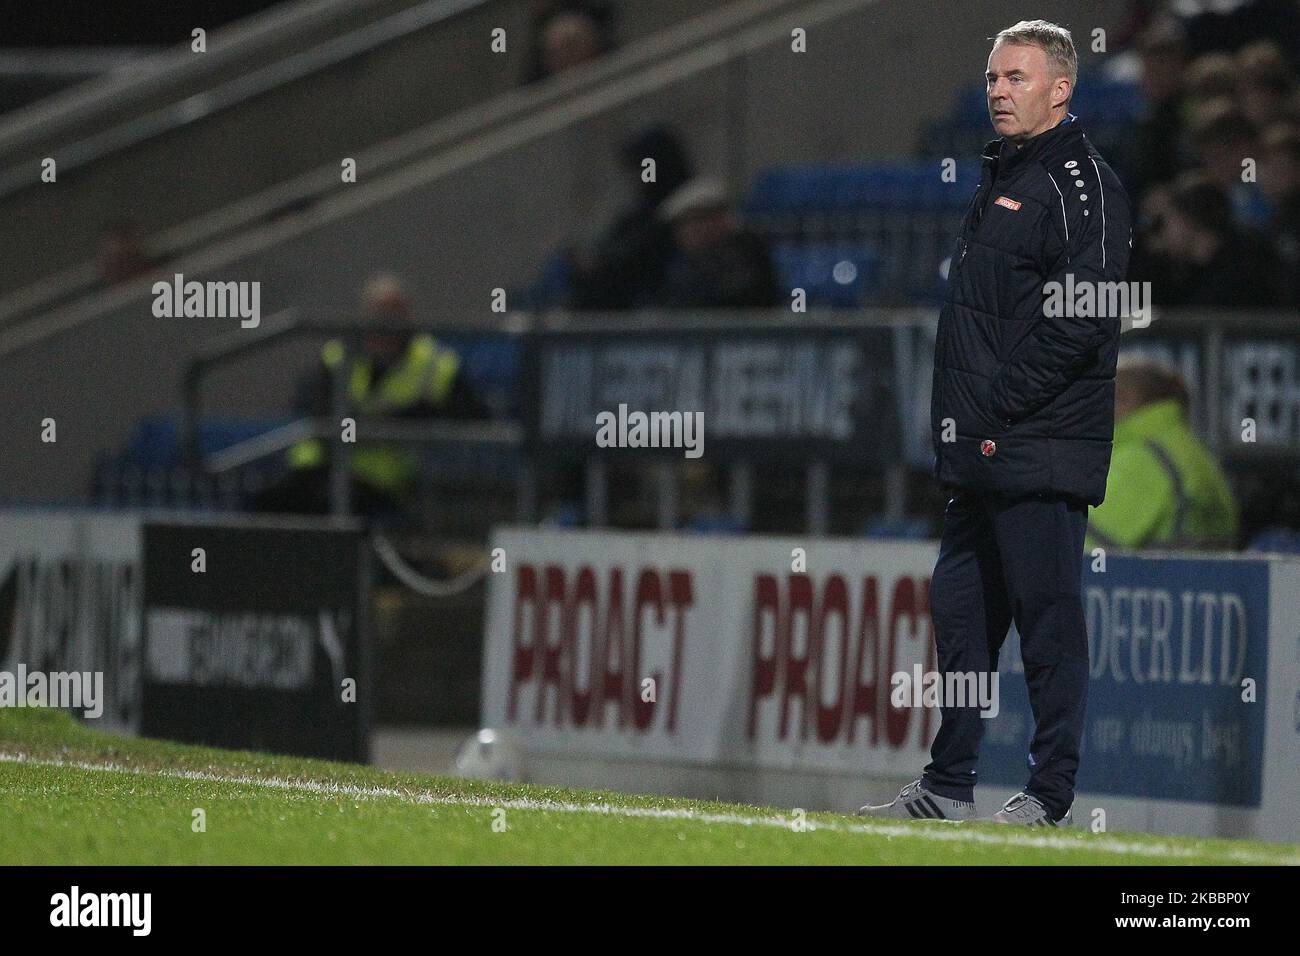 Chesterfield manager John Sheridan during the Vanarama National League match between Chesterfield and Hartlepool United at the Proact stadium, Chesterfield on Tuesday 26th November 2019. (Photo by Mark Fletcher/MI News/NurPhoto) Stock Photo